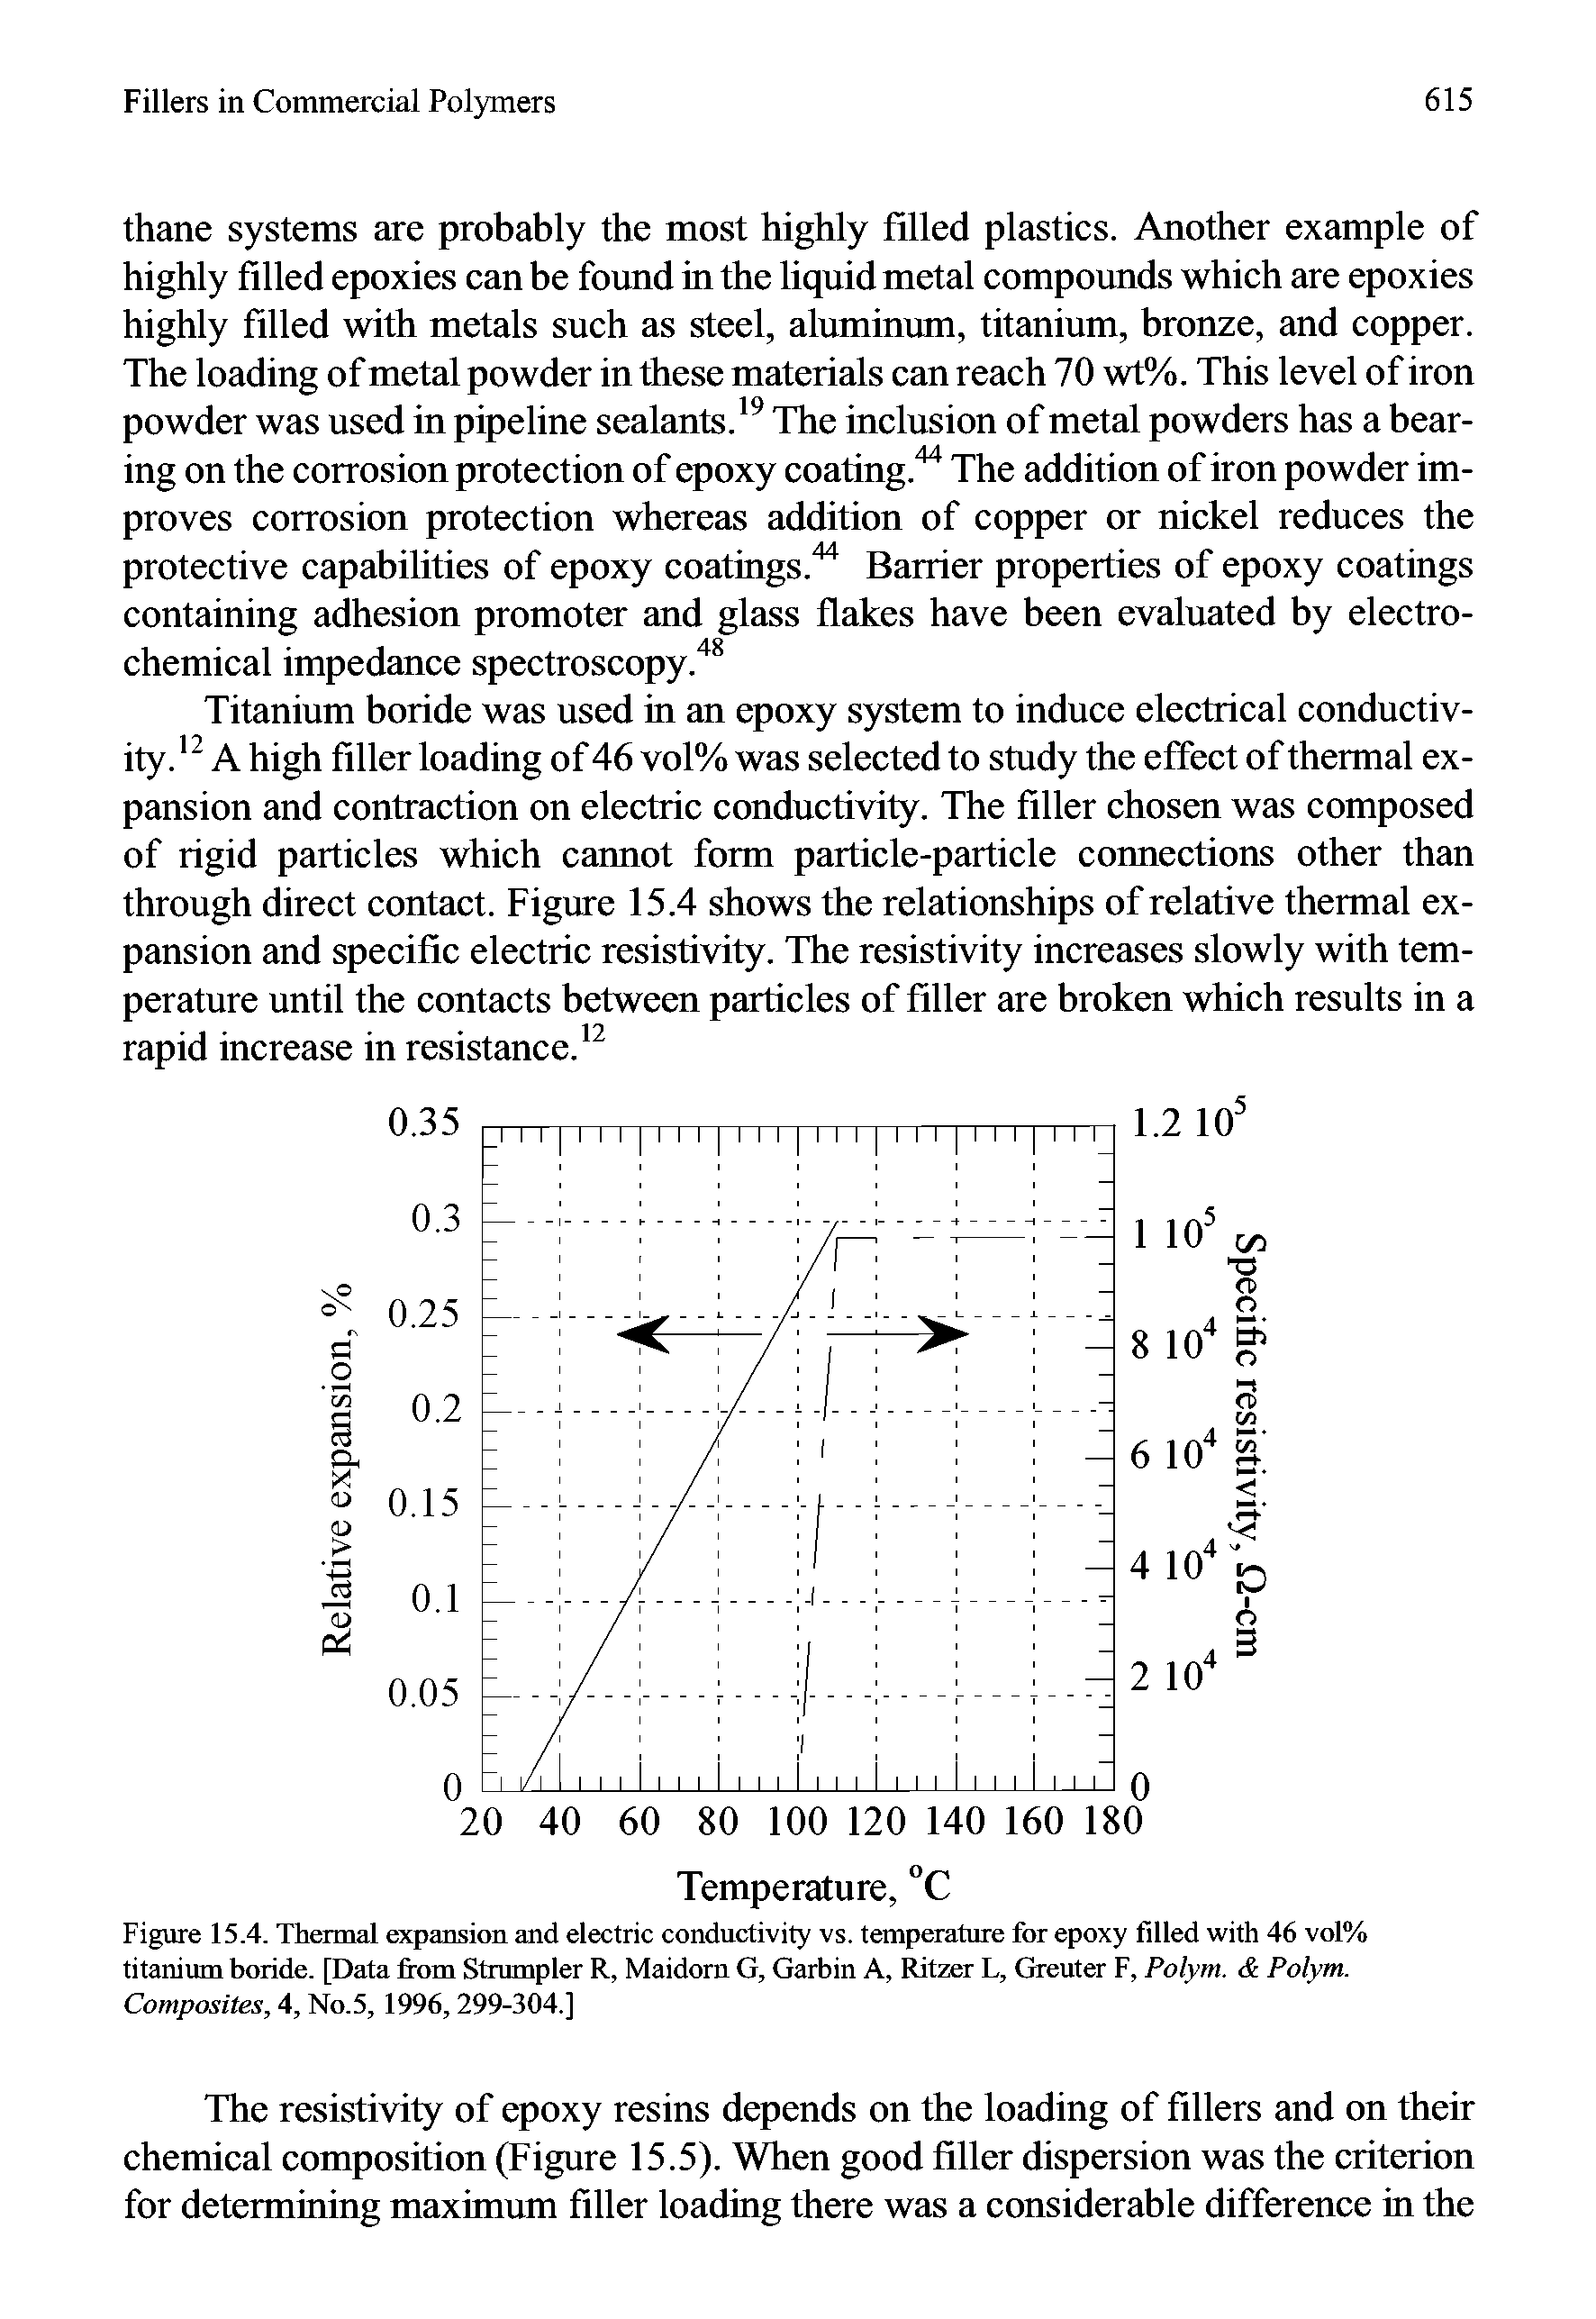 Figure 15.4. Thennal expansion and electric conductivity vs. temperature for epoxy filled with 46 vol% titanium boride. [Data from Strumpler R, Maidorn (1, Garbin A, Ritzer L, Greuter F, Polym. < Polym. Composites, 4, No.5, 1996,299-304.]...